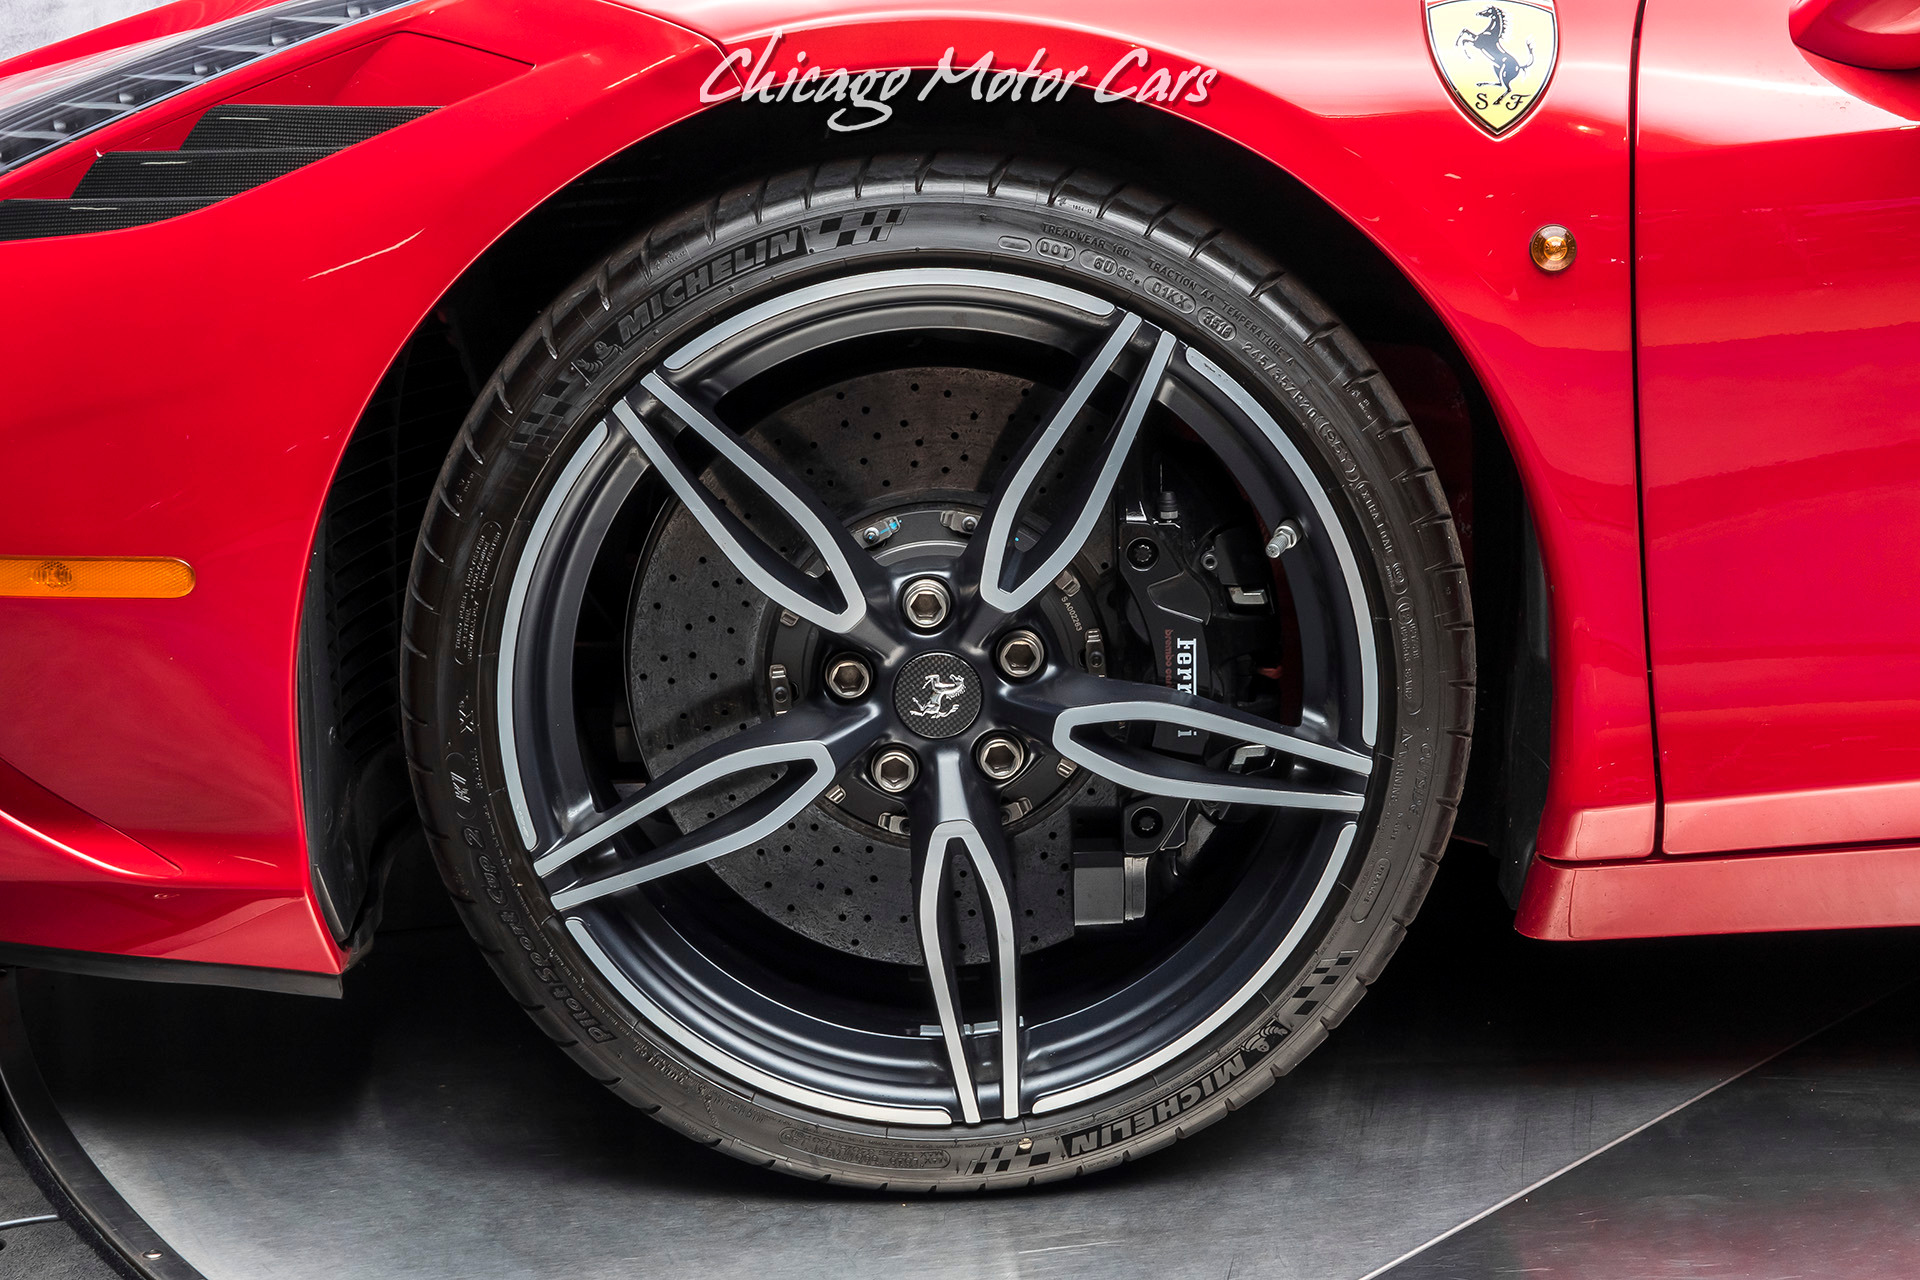 Used-2015-Ferrari-458-Speciale-Aperta-1-of-499-PRODUCED-WORLD-WIDE-HIGHLY-EXCLUSIVE